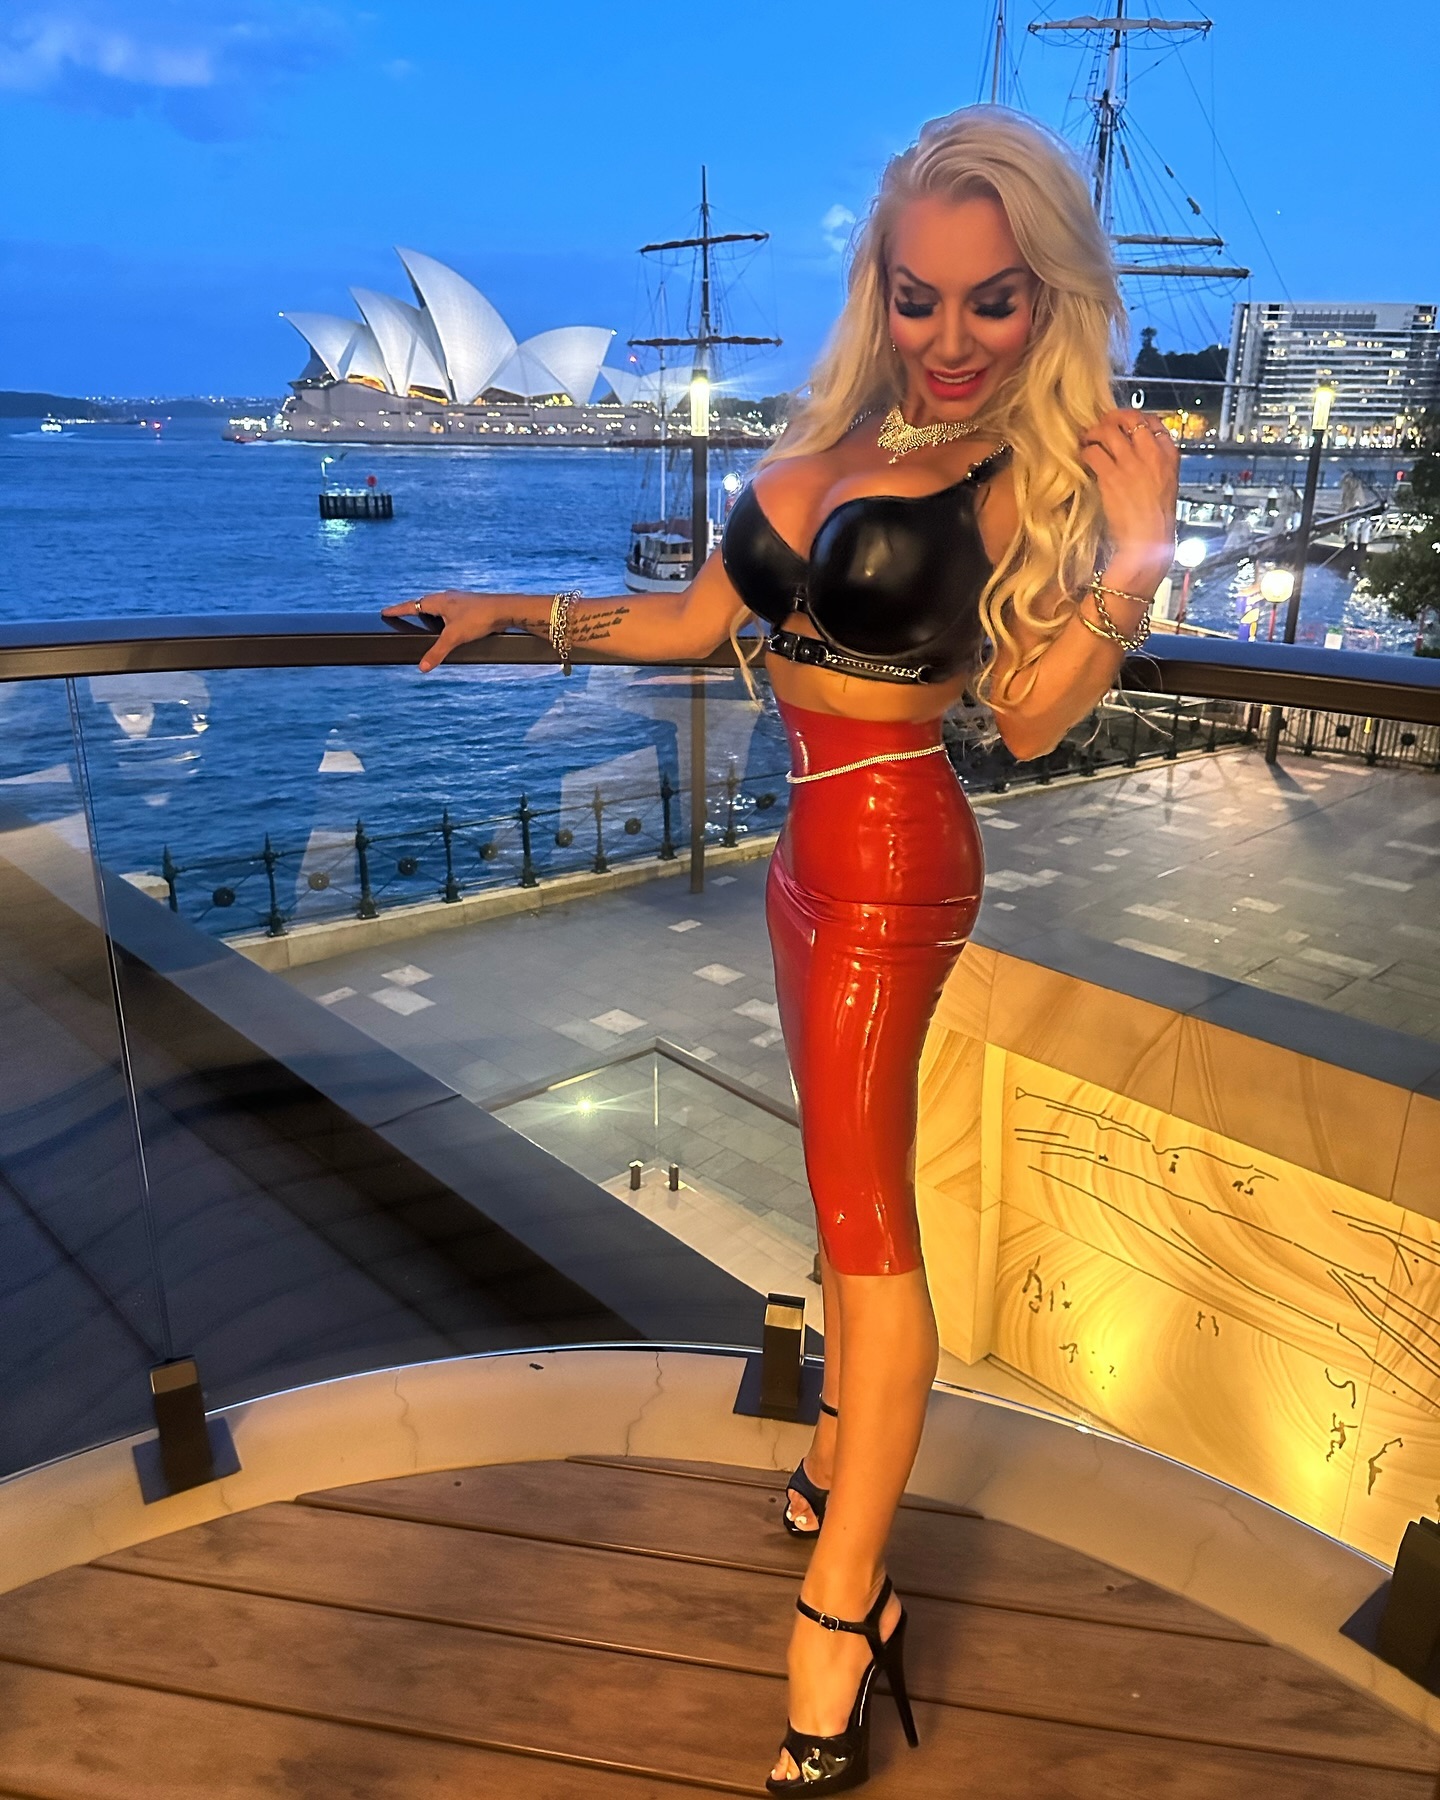 -
Can confirm you can NOT move in latex skirts 🤣 
-
#latex #red #latex #sydney